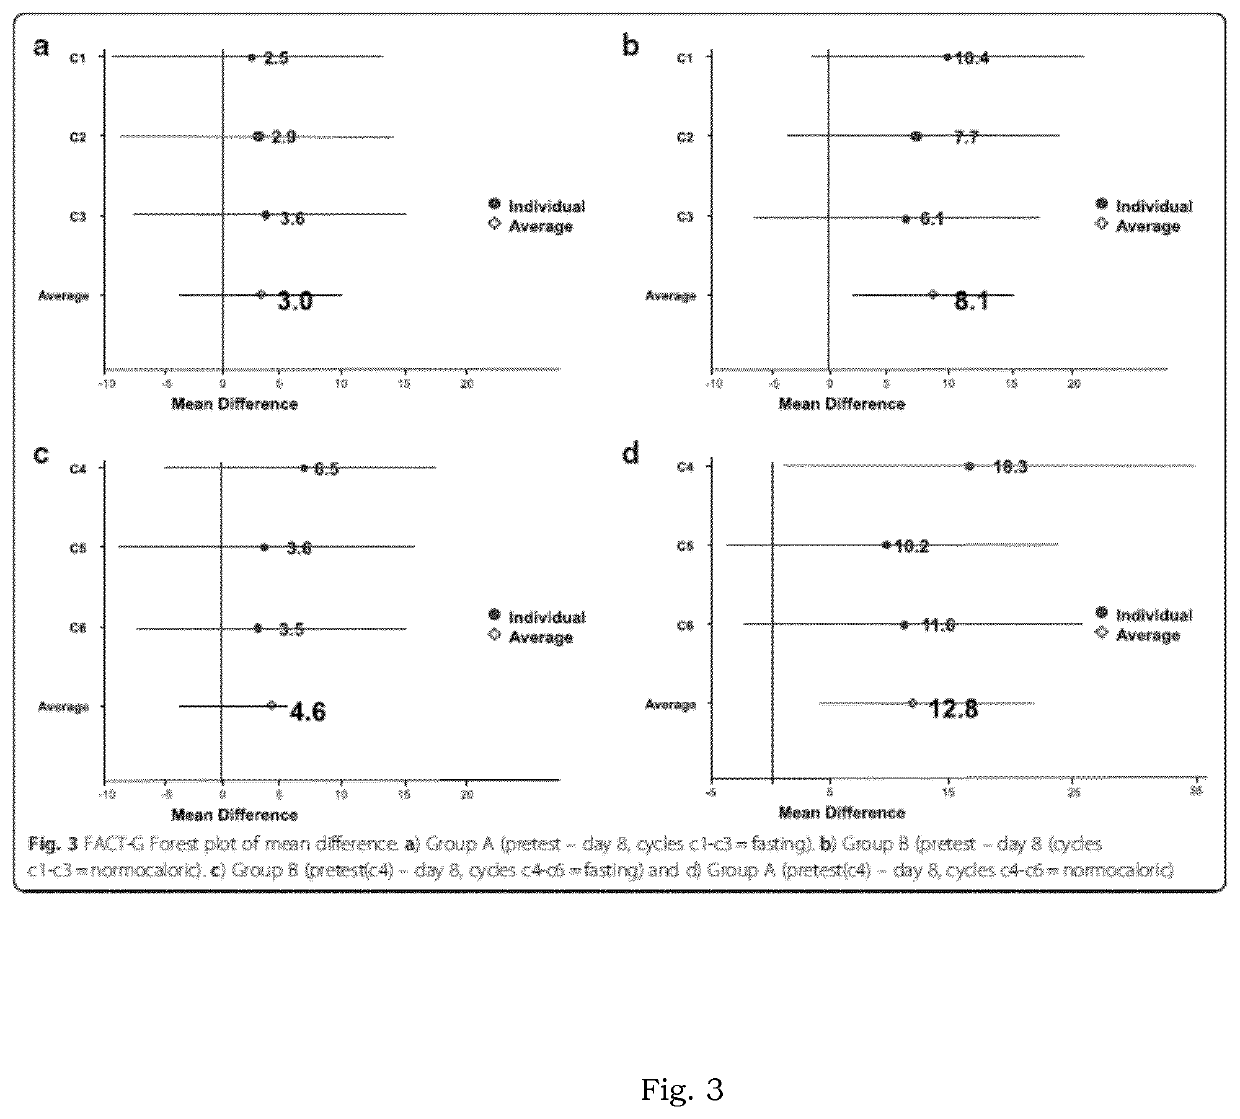 Effects of a short-term fasting mimicking diet on quality of life and tolerance to chemotherapy in patients with cancer